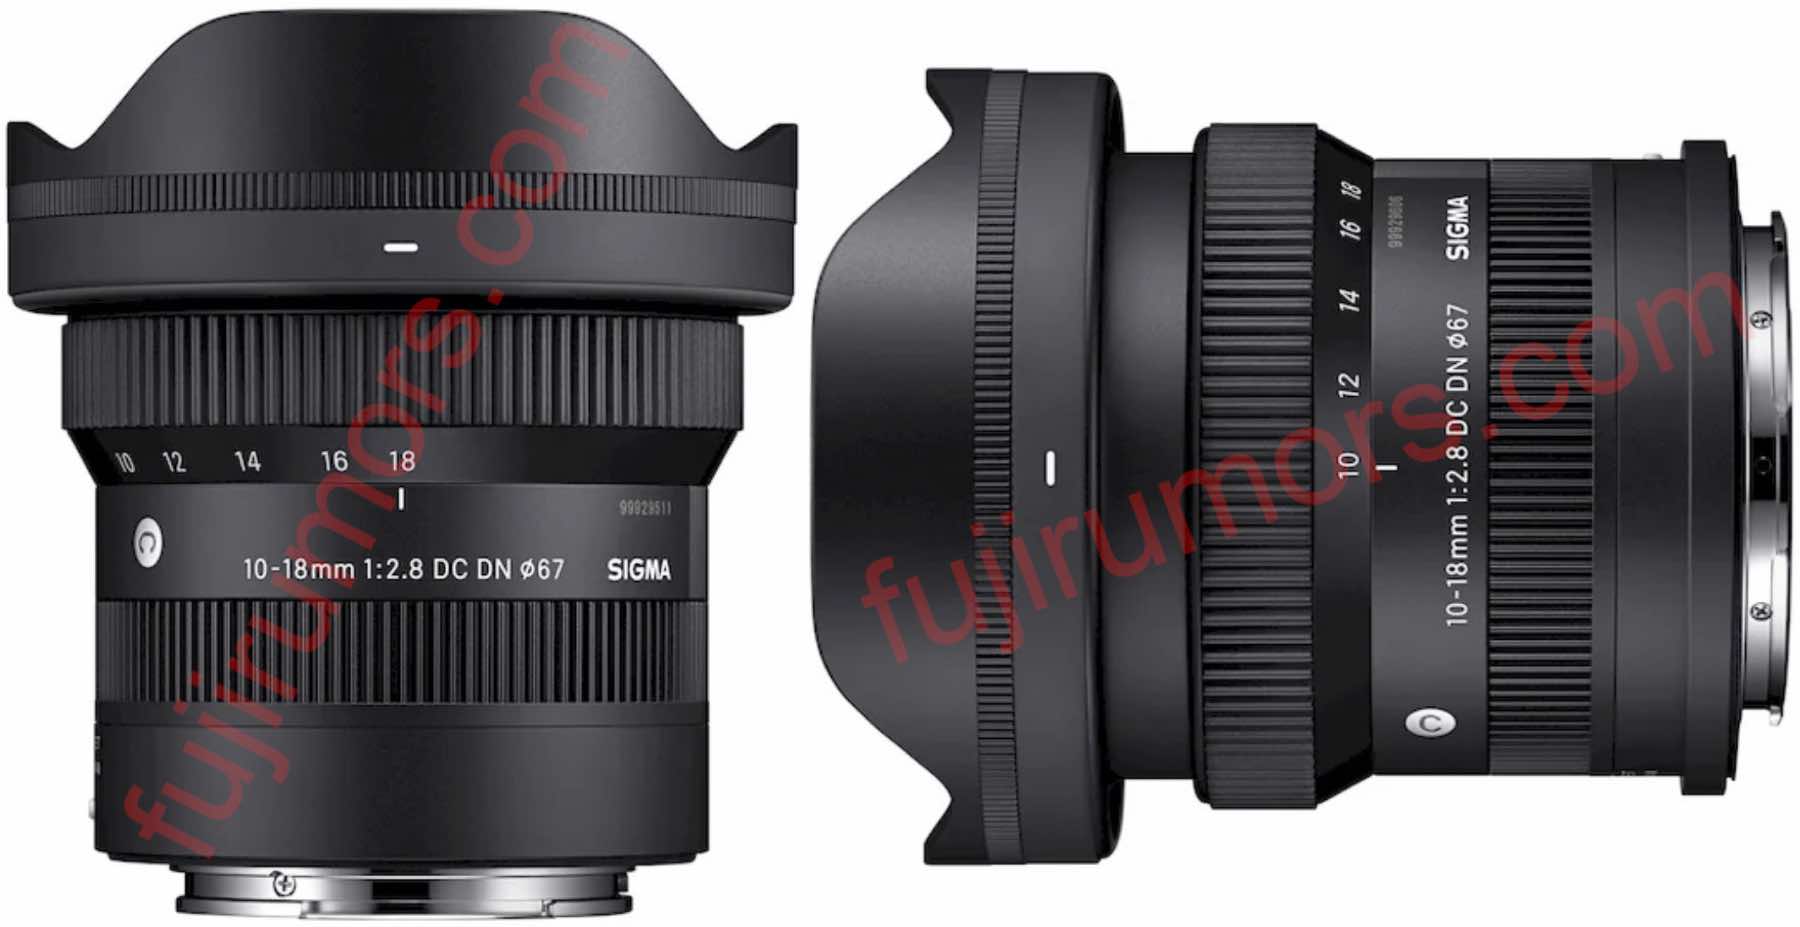 RUMOR: Sigma 24-70mm f/2.8, 70-200mm f/2.8 and maybe 100-400mm lenses  coming next? – sonyalpharumors